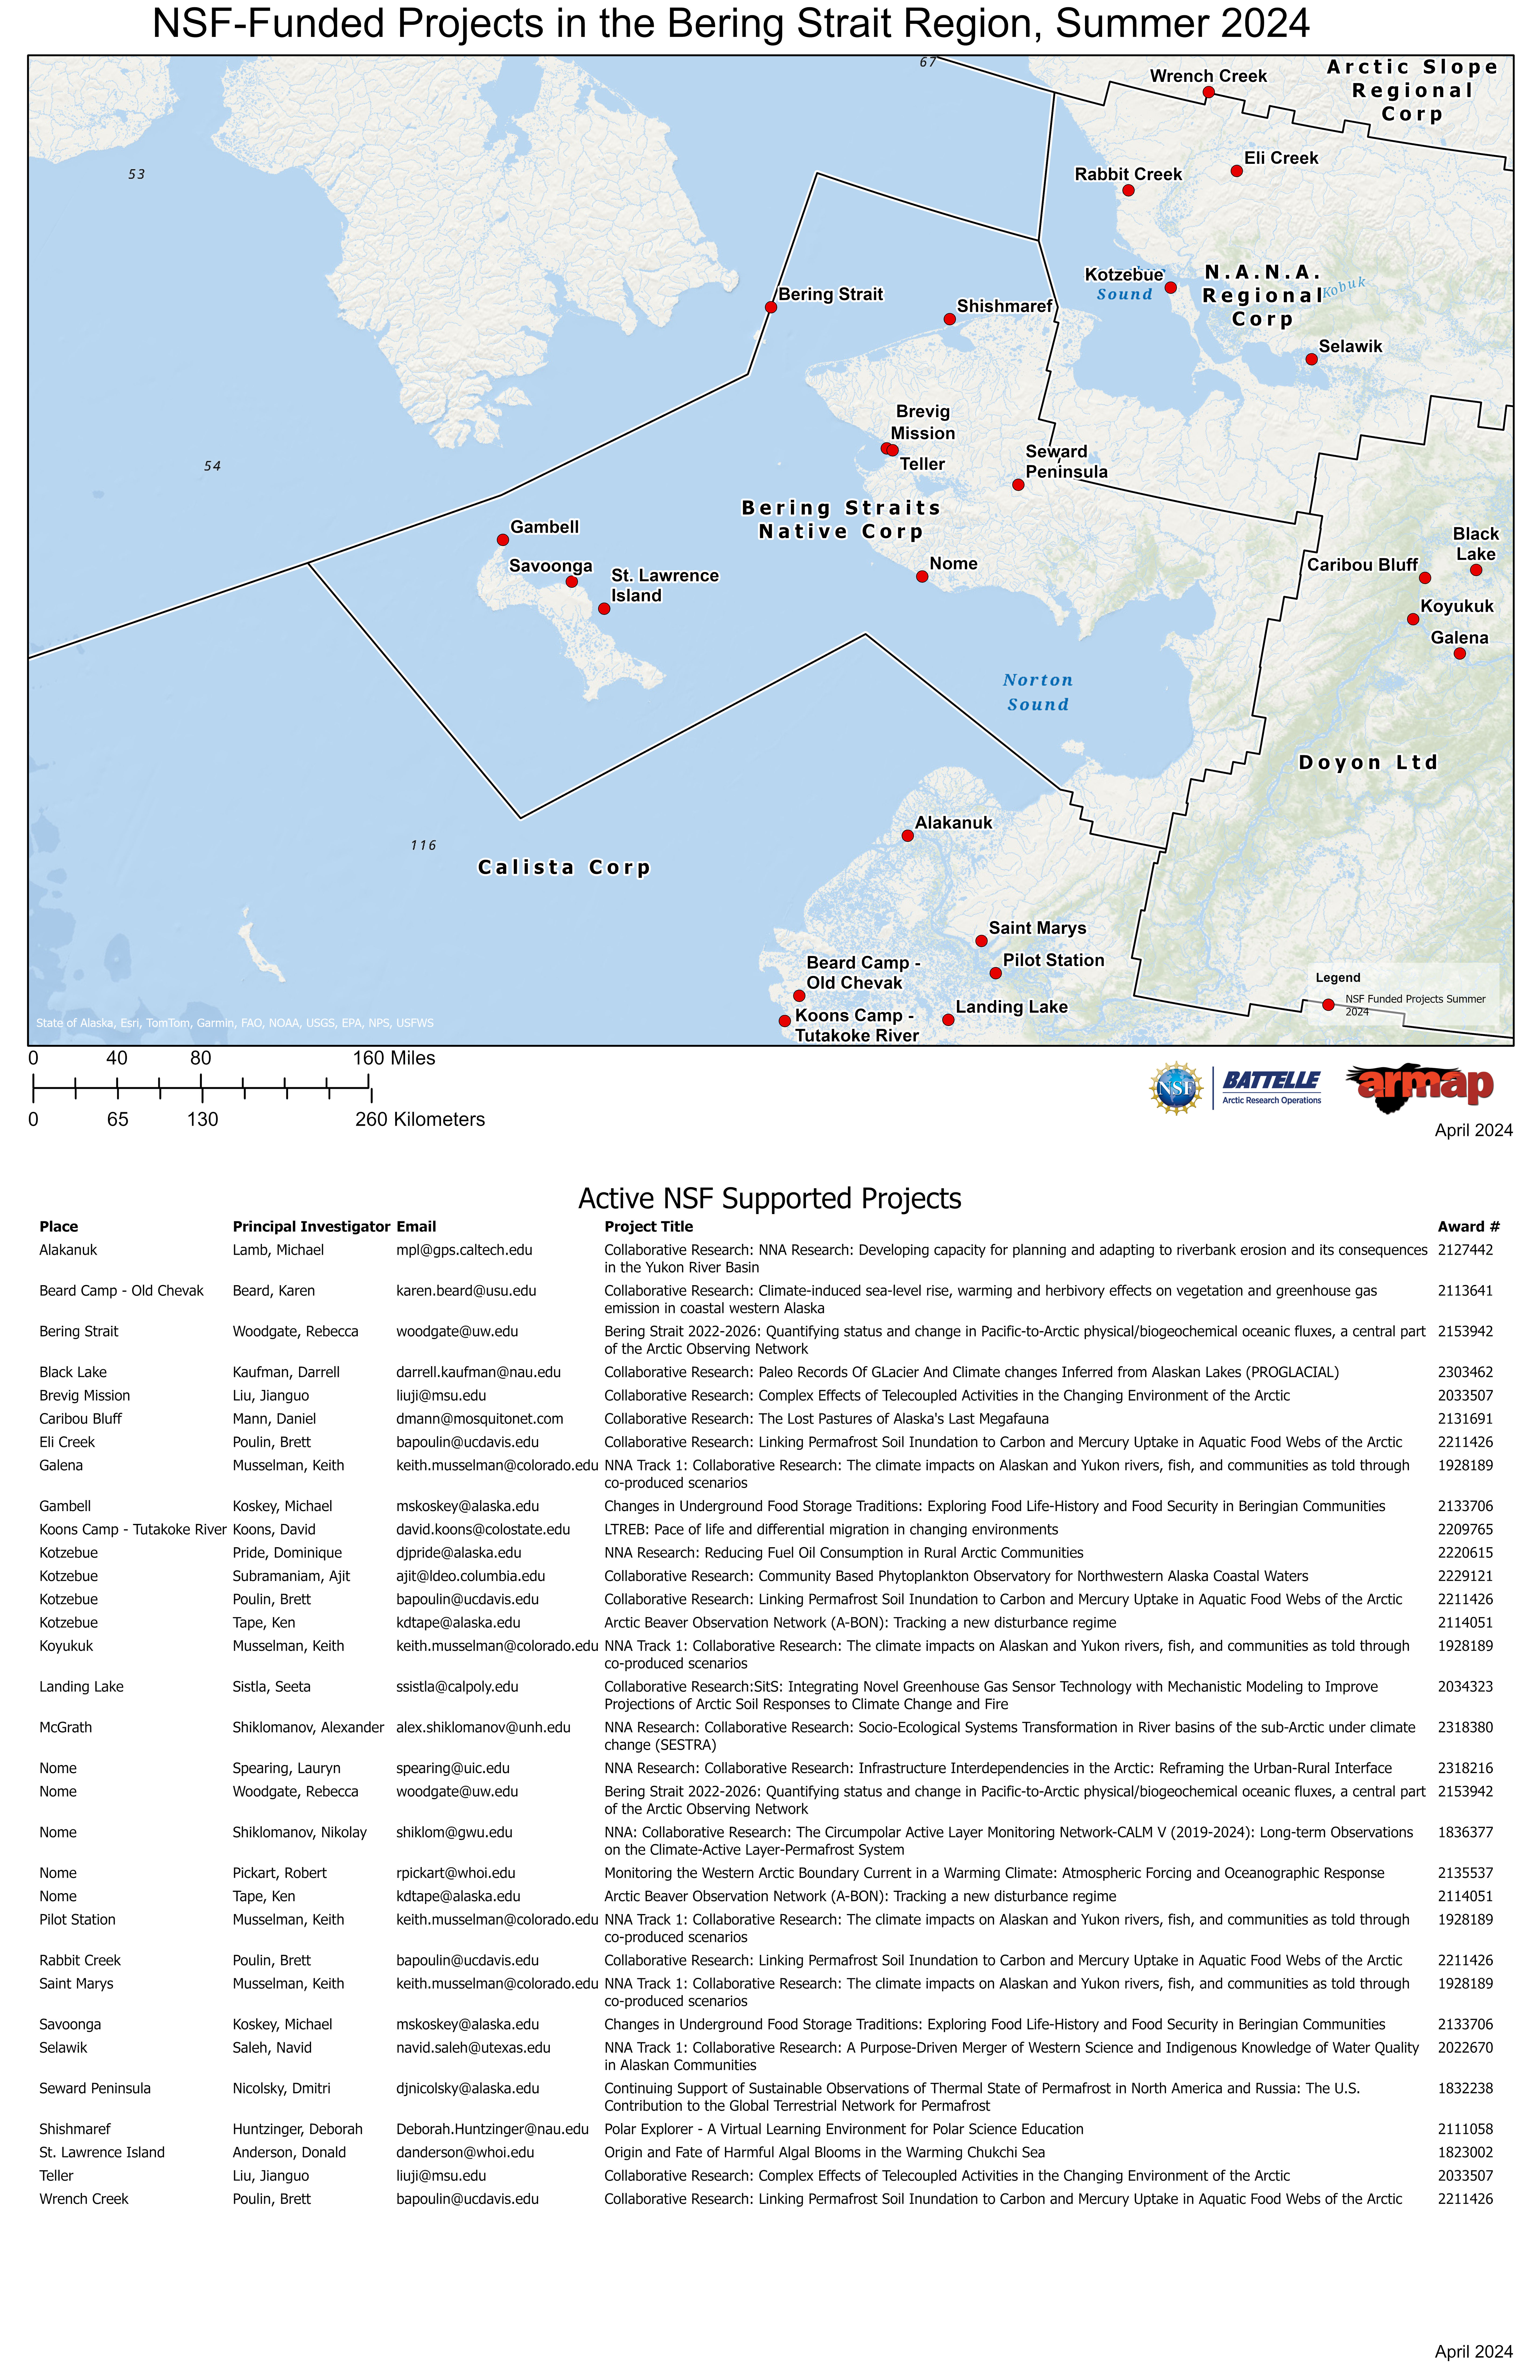 NSF-Funded Projects in the Bering Strait Region, Summer of this Year